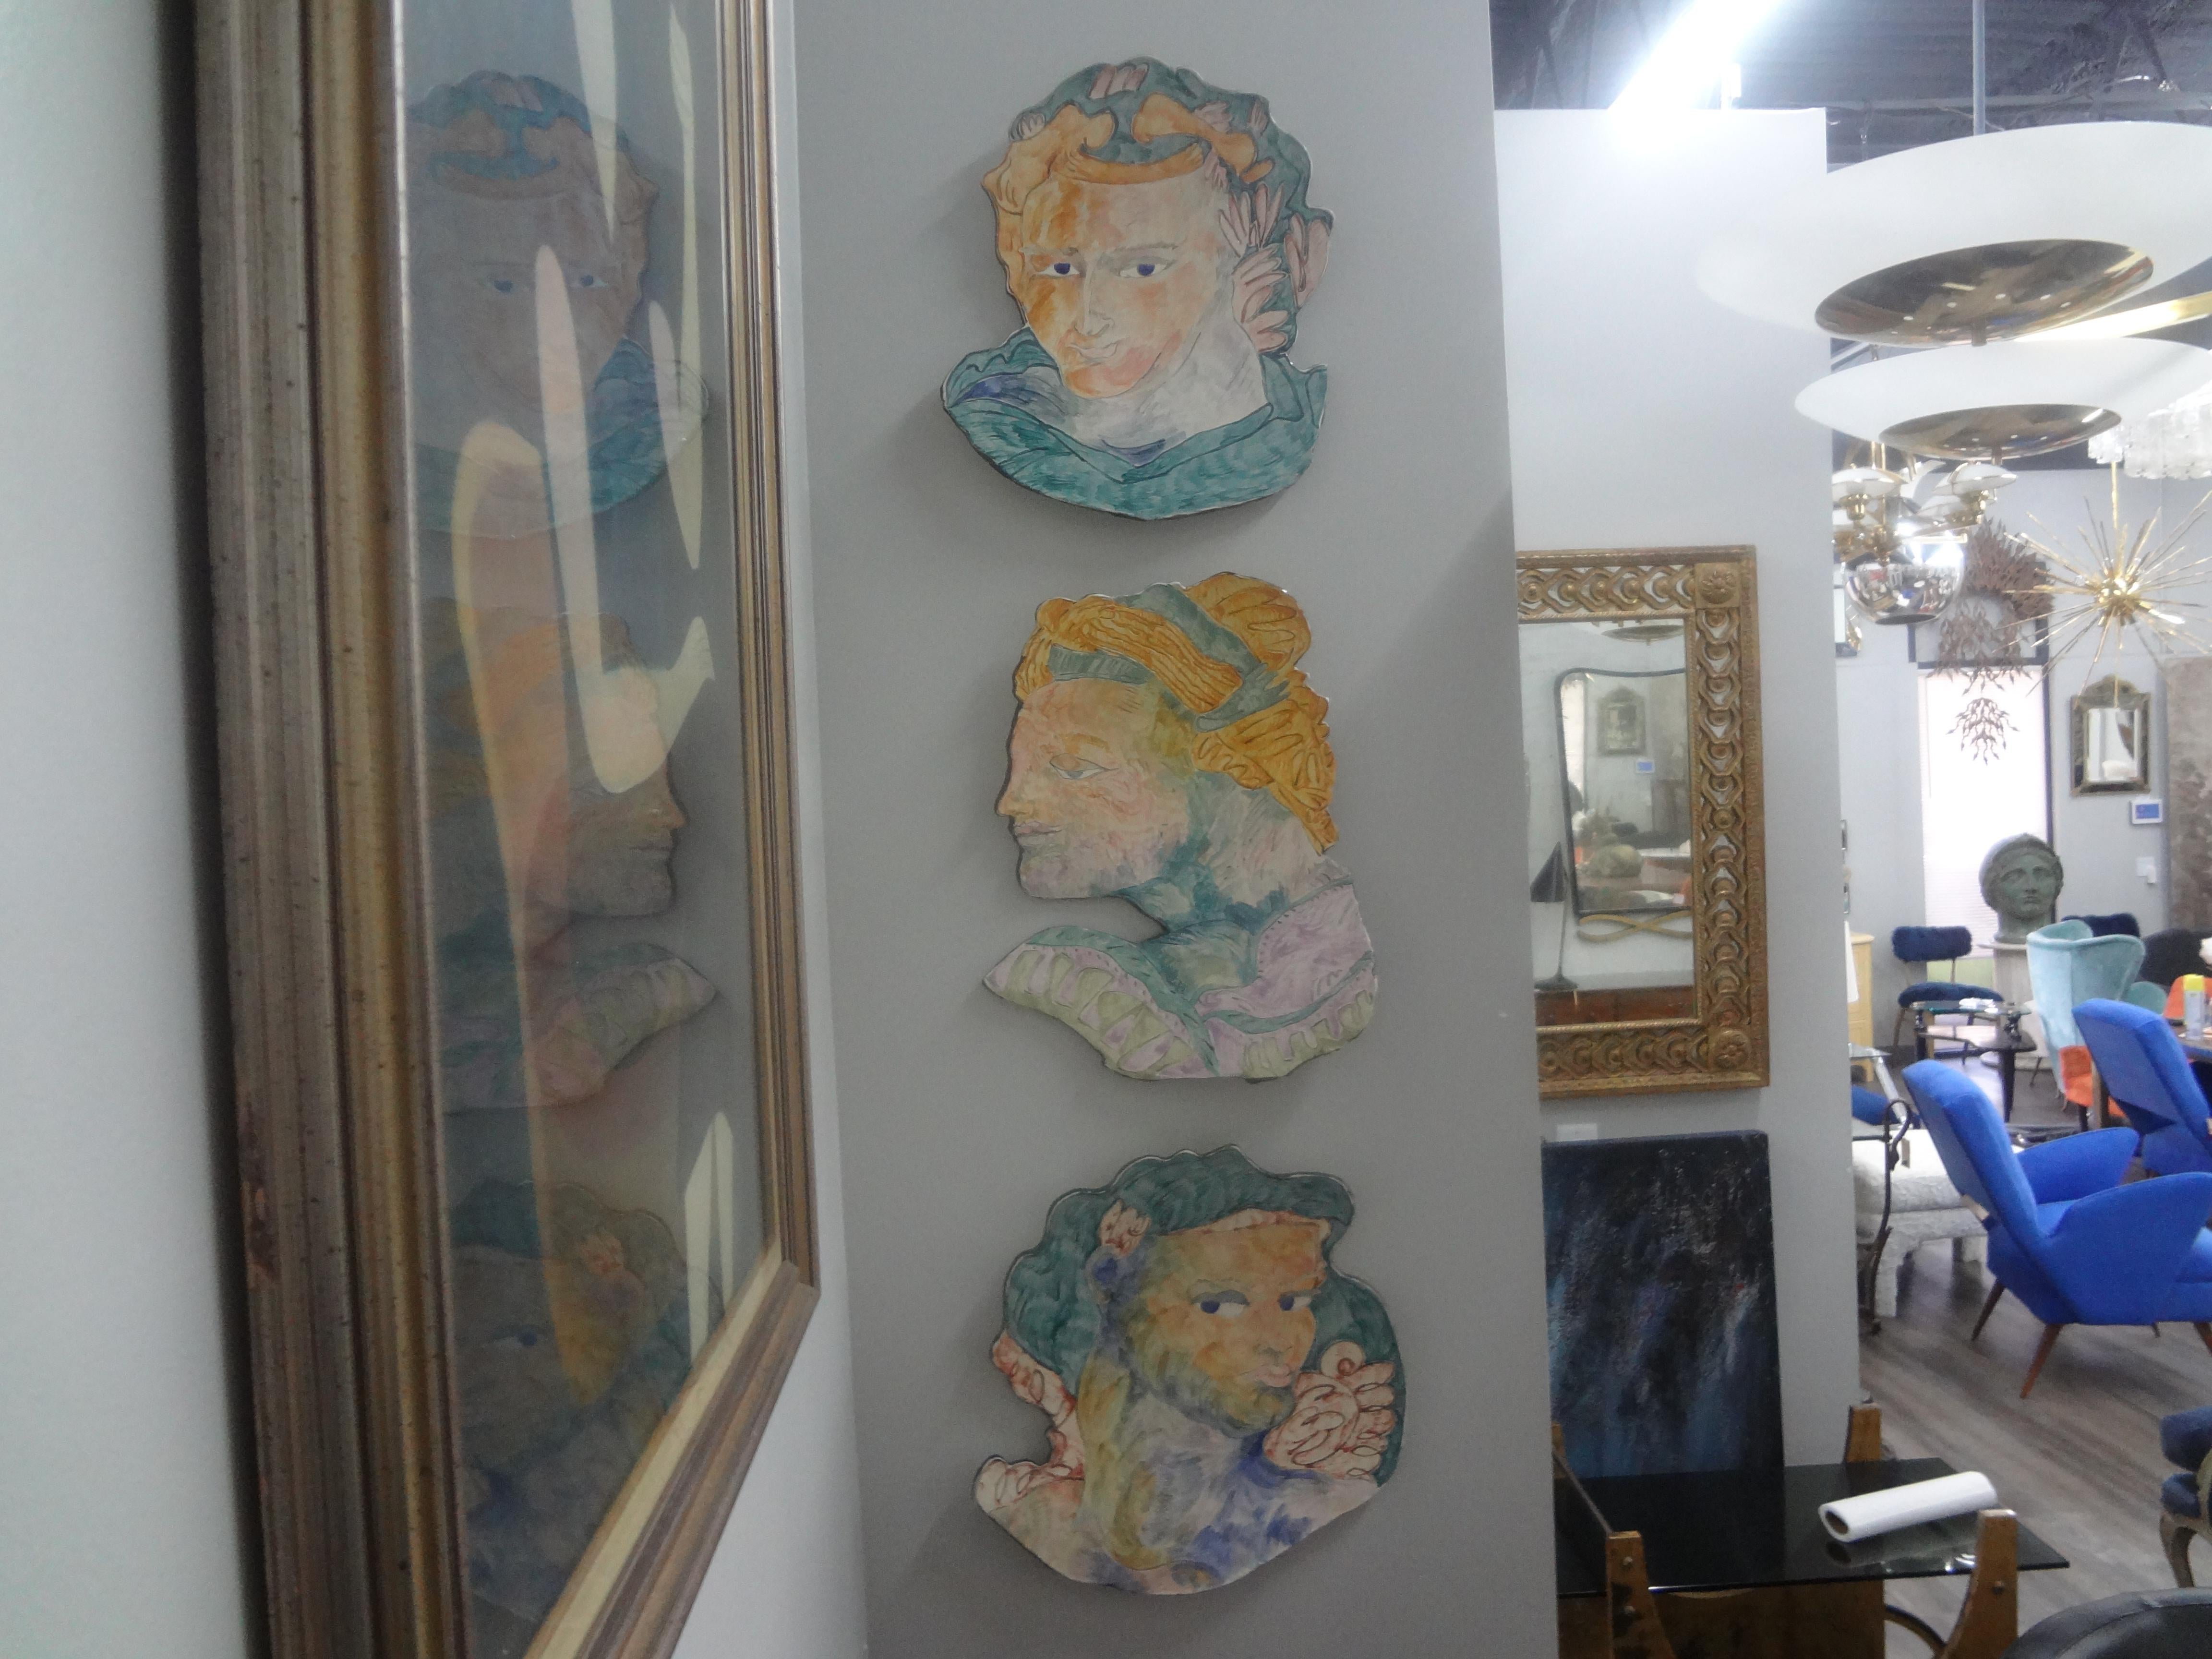 Set Of Mid Century Glazed Ceramic Wall Plaques.
This unique set of three hand made and decorated glazed ceramic wall sculptures or wall chargers depict classical Greek heads executed in soft pastel colors.
Most unusual wall decorations!